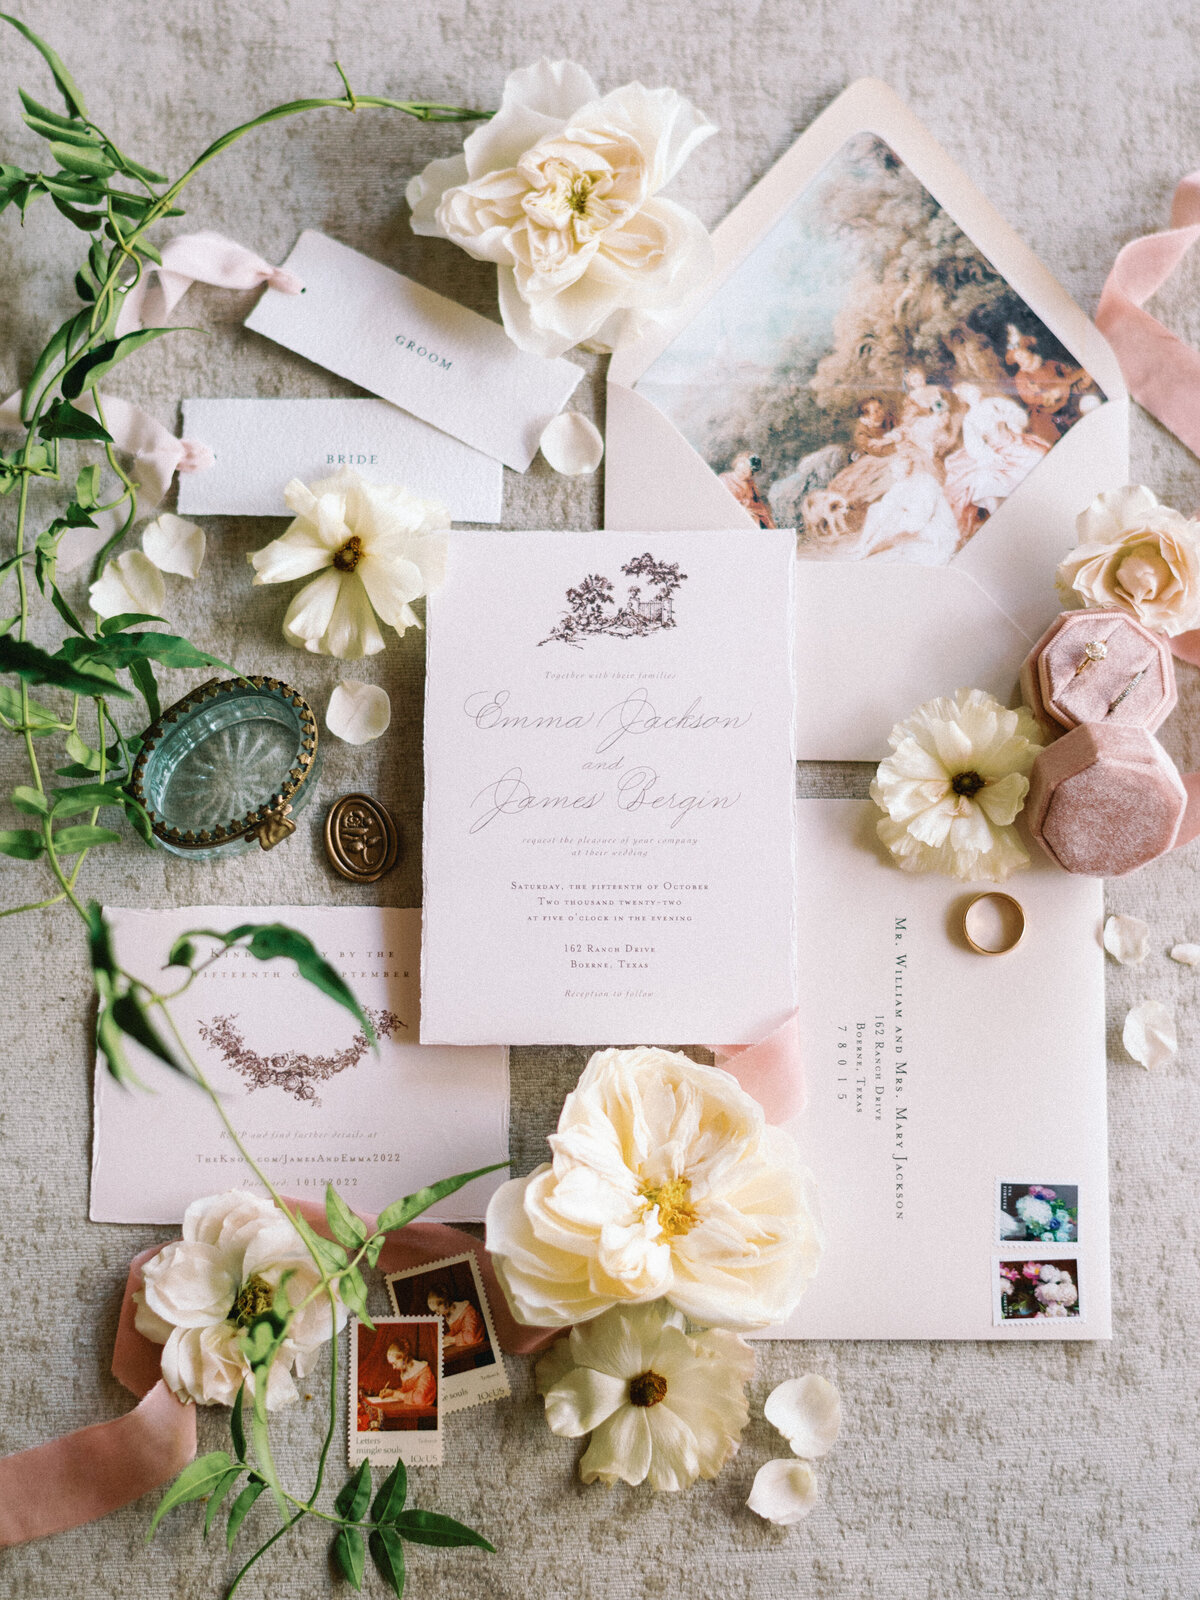 Bespoke bridal stationary with white flowers and calligraphy and vintage stamps on wedding day